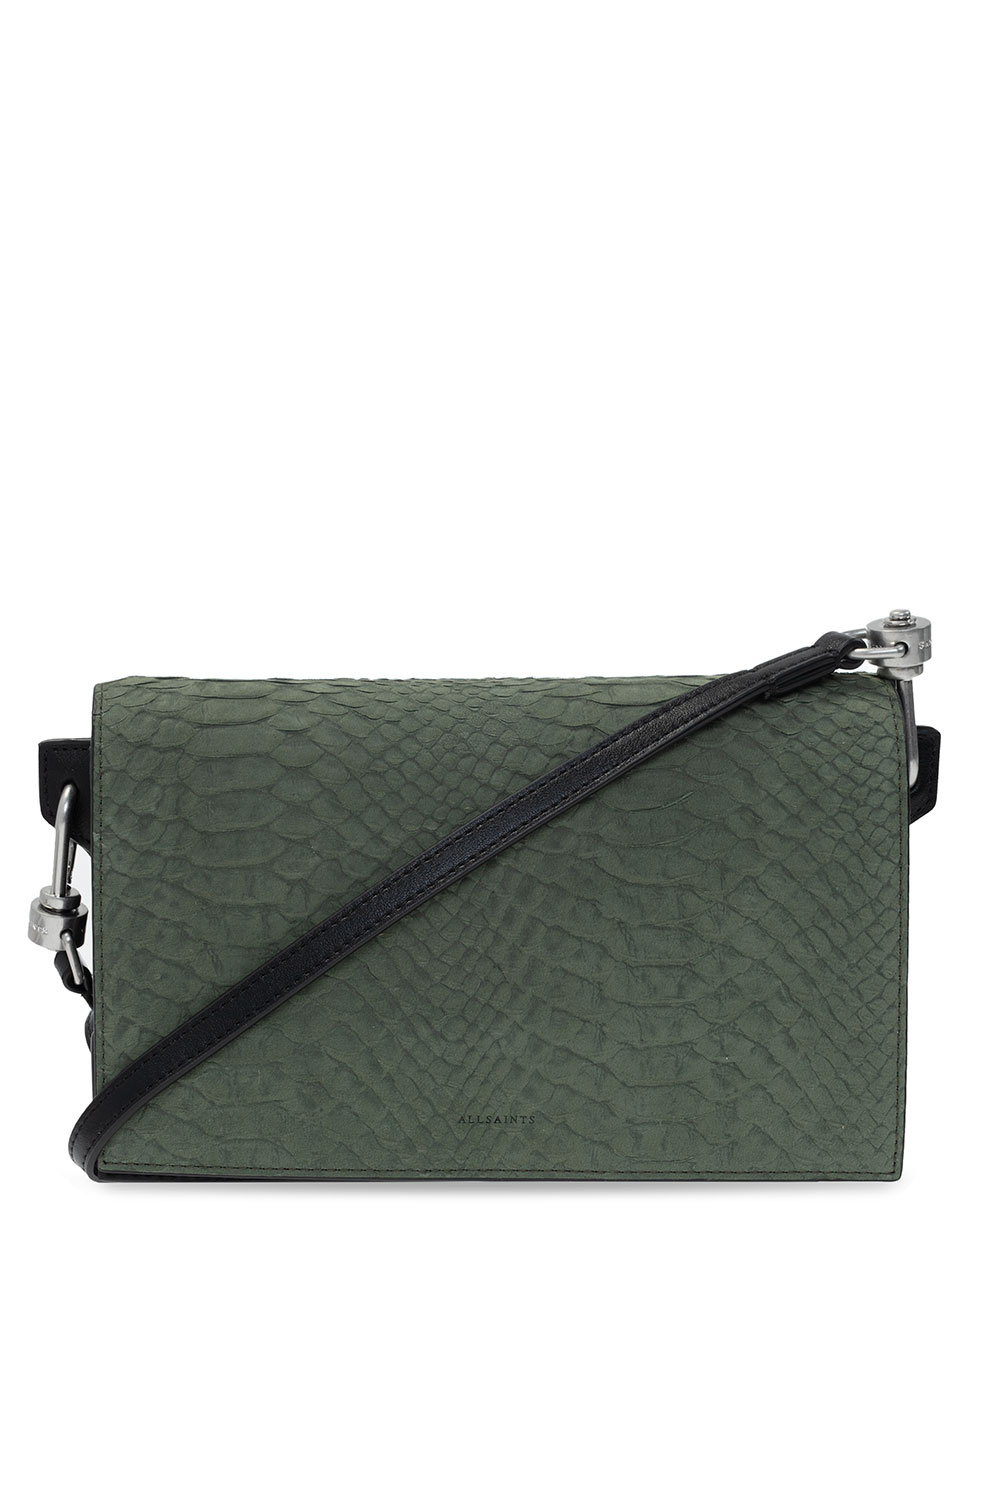 AllSaints 'Goldsmith' strapped wallet | Women's Accessories 